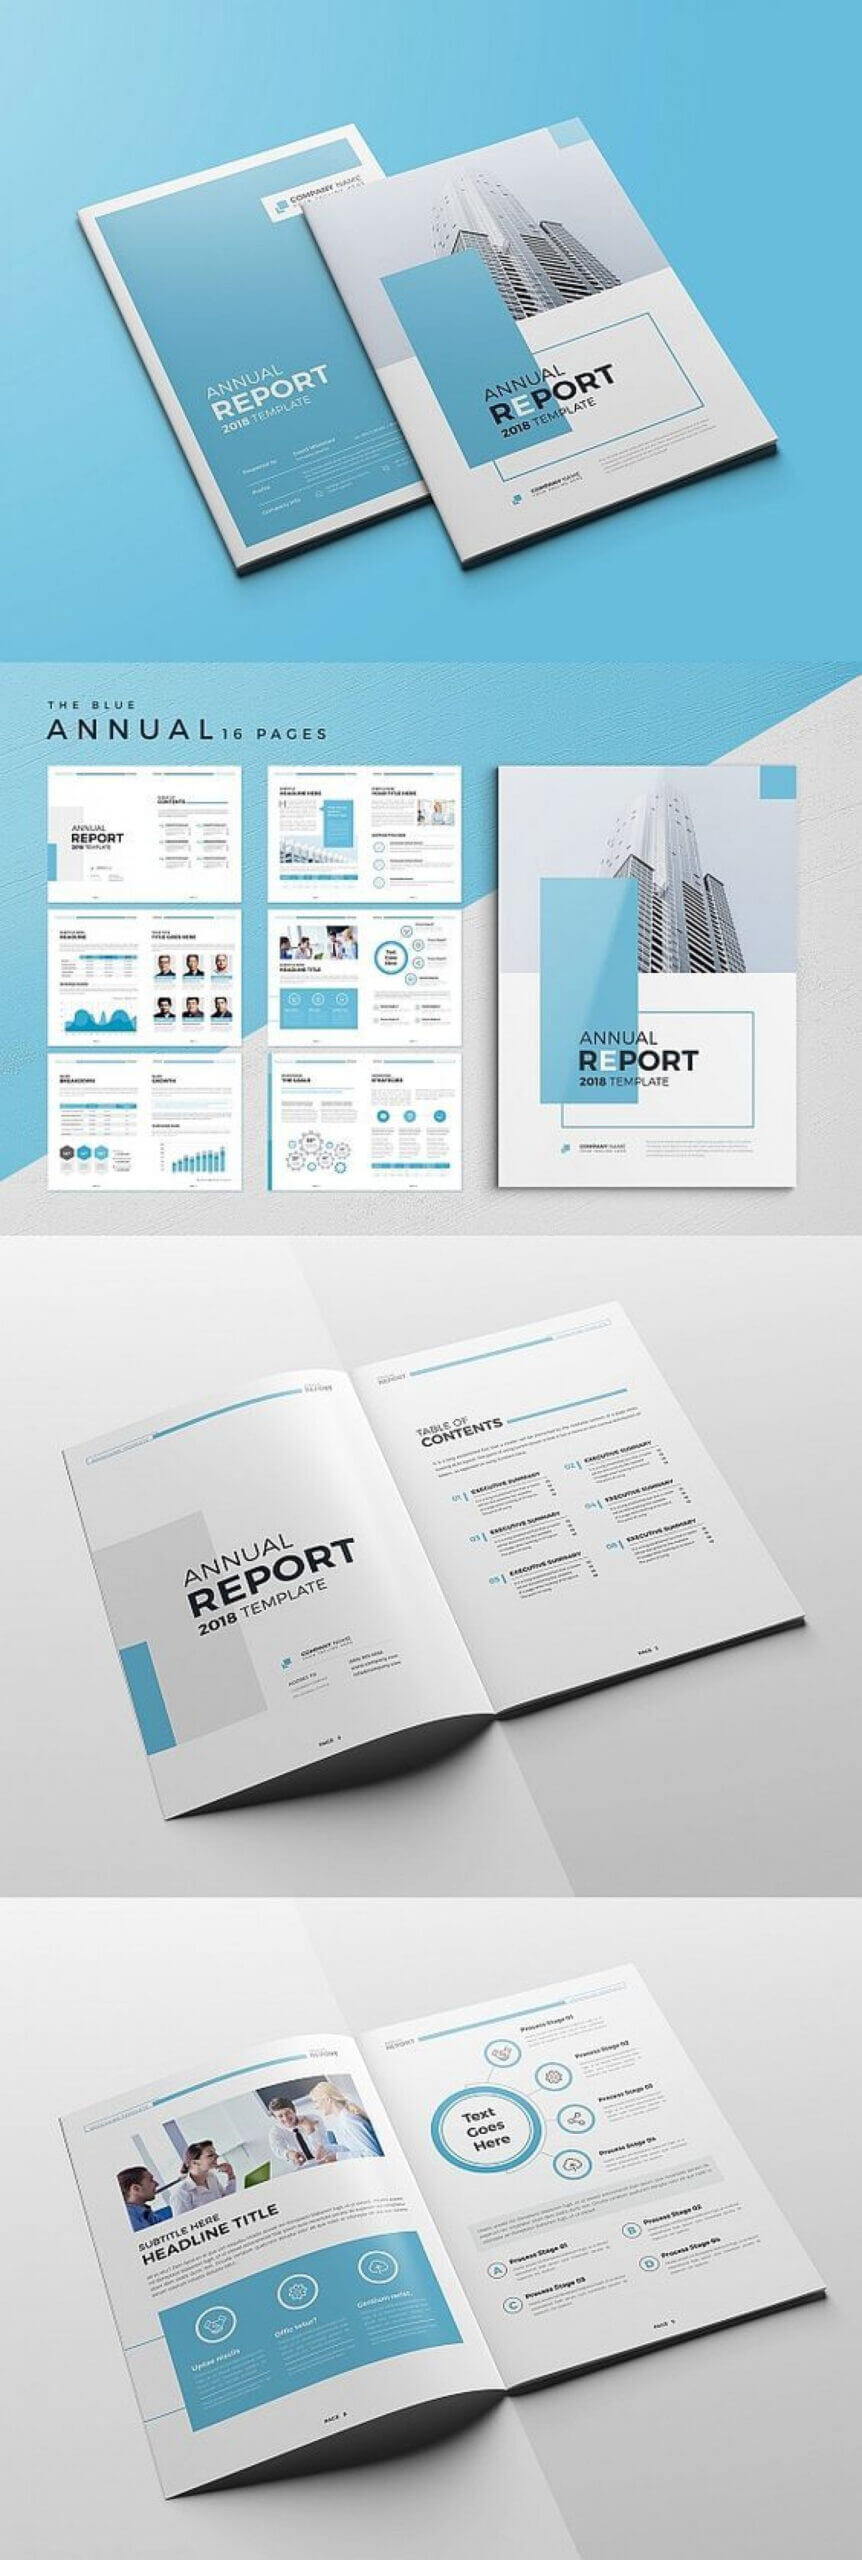 010 Creative Annual Report Template Word Marvelous Ideas Within Annual Report Template Word